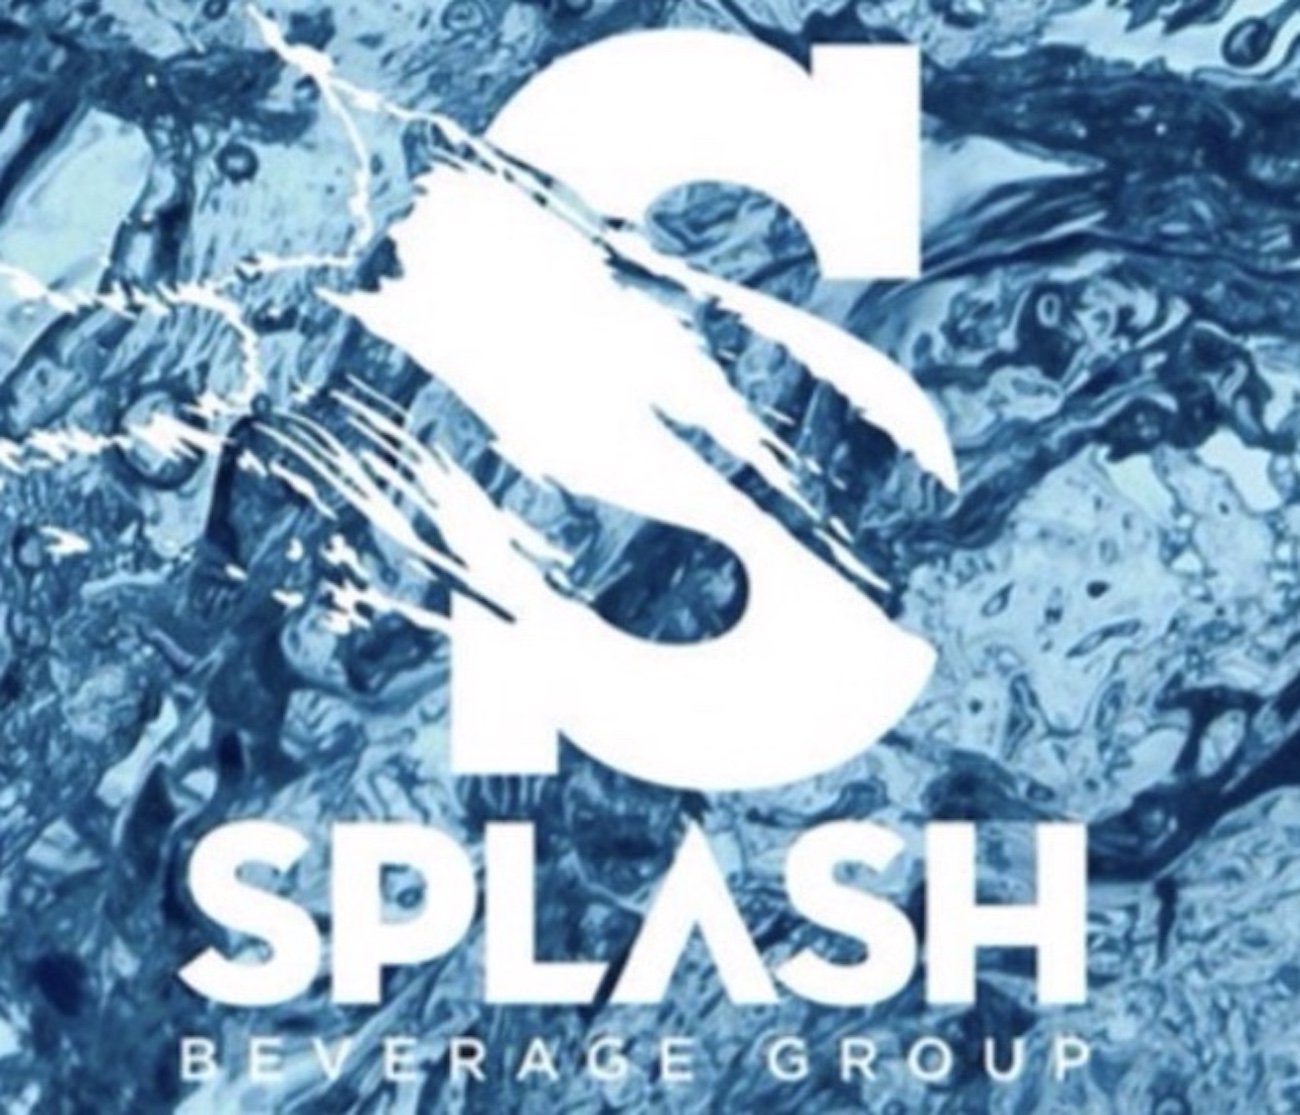 Early To The Splash Beverage Group Investment Proposition May Be An Excellent Strategy...Here's Why ($SBEV)